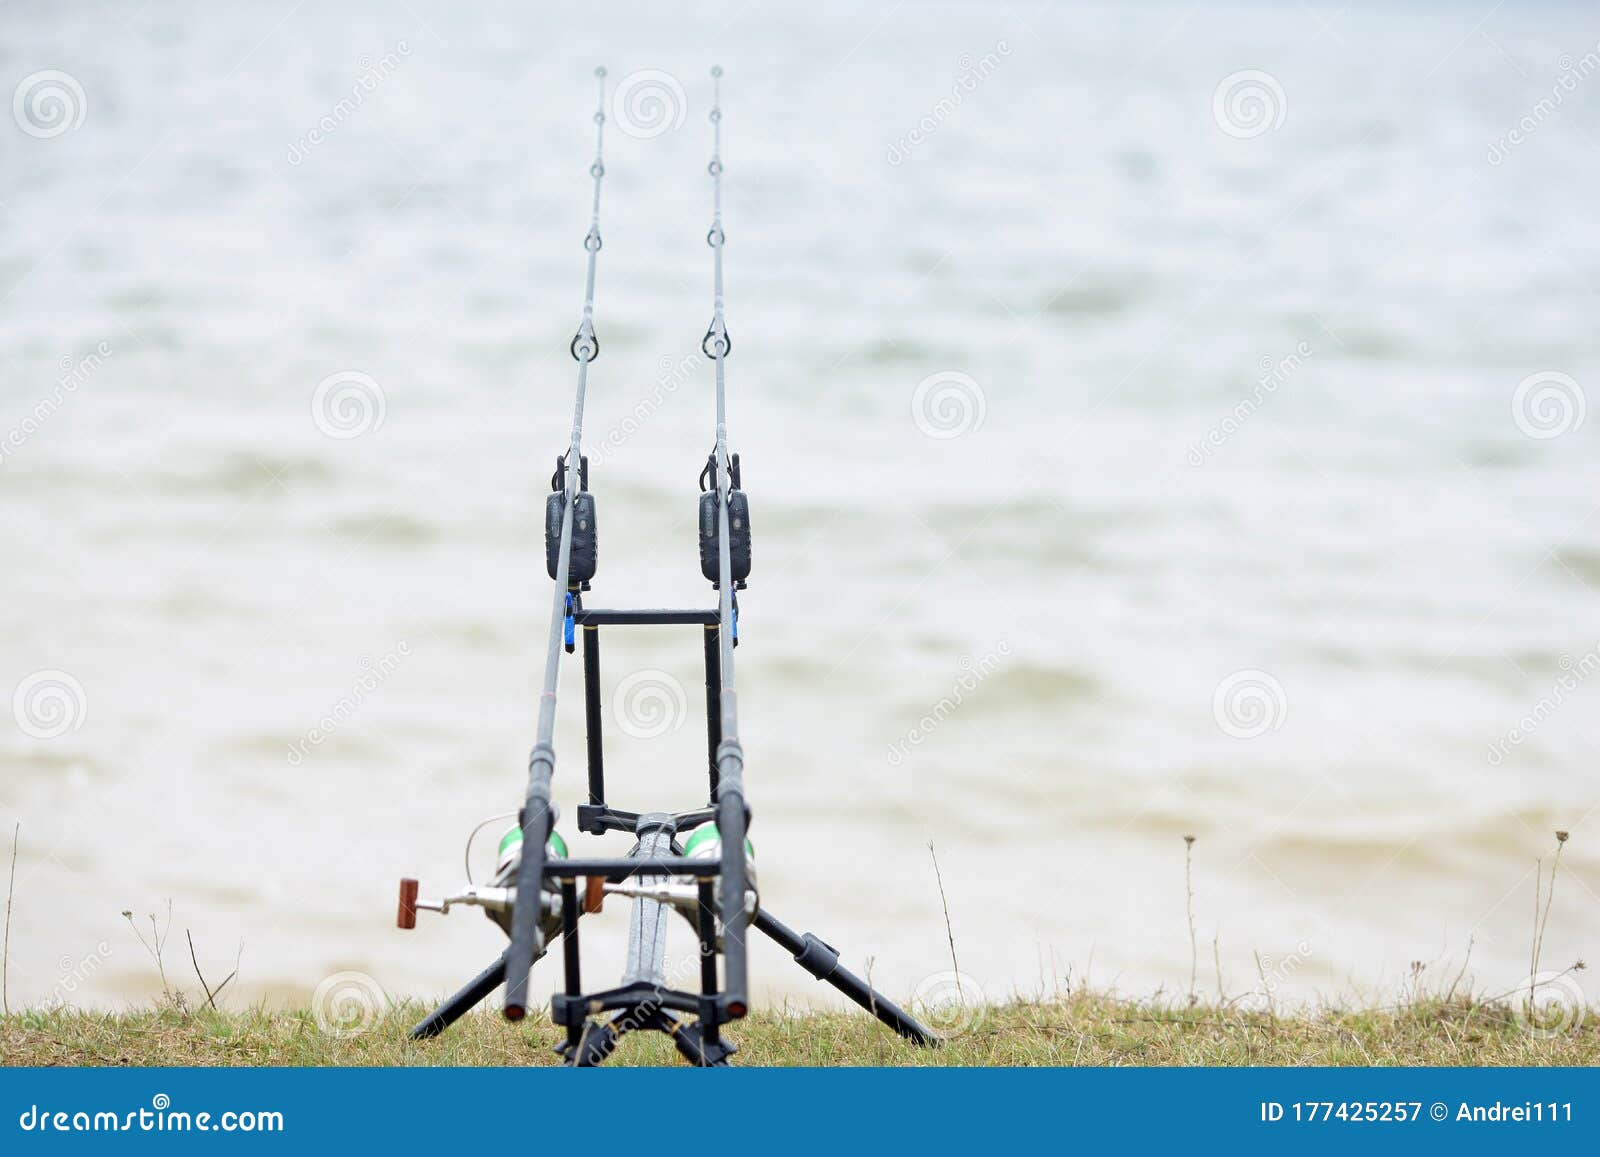 Carp Stand with Two Fishing Rods Stock Image - Image of nature, male:  177425257, carp stand